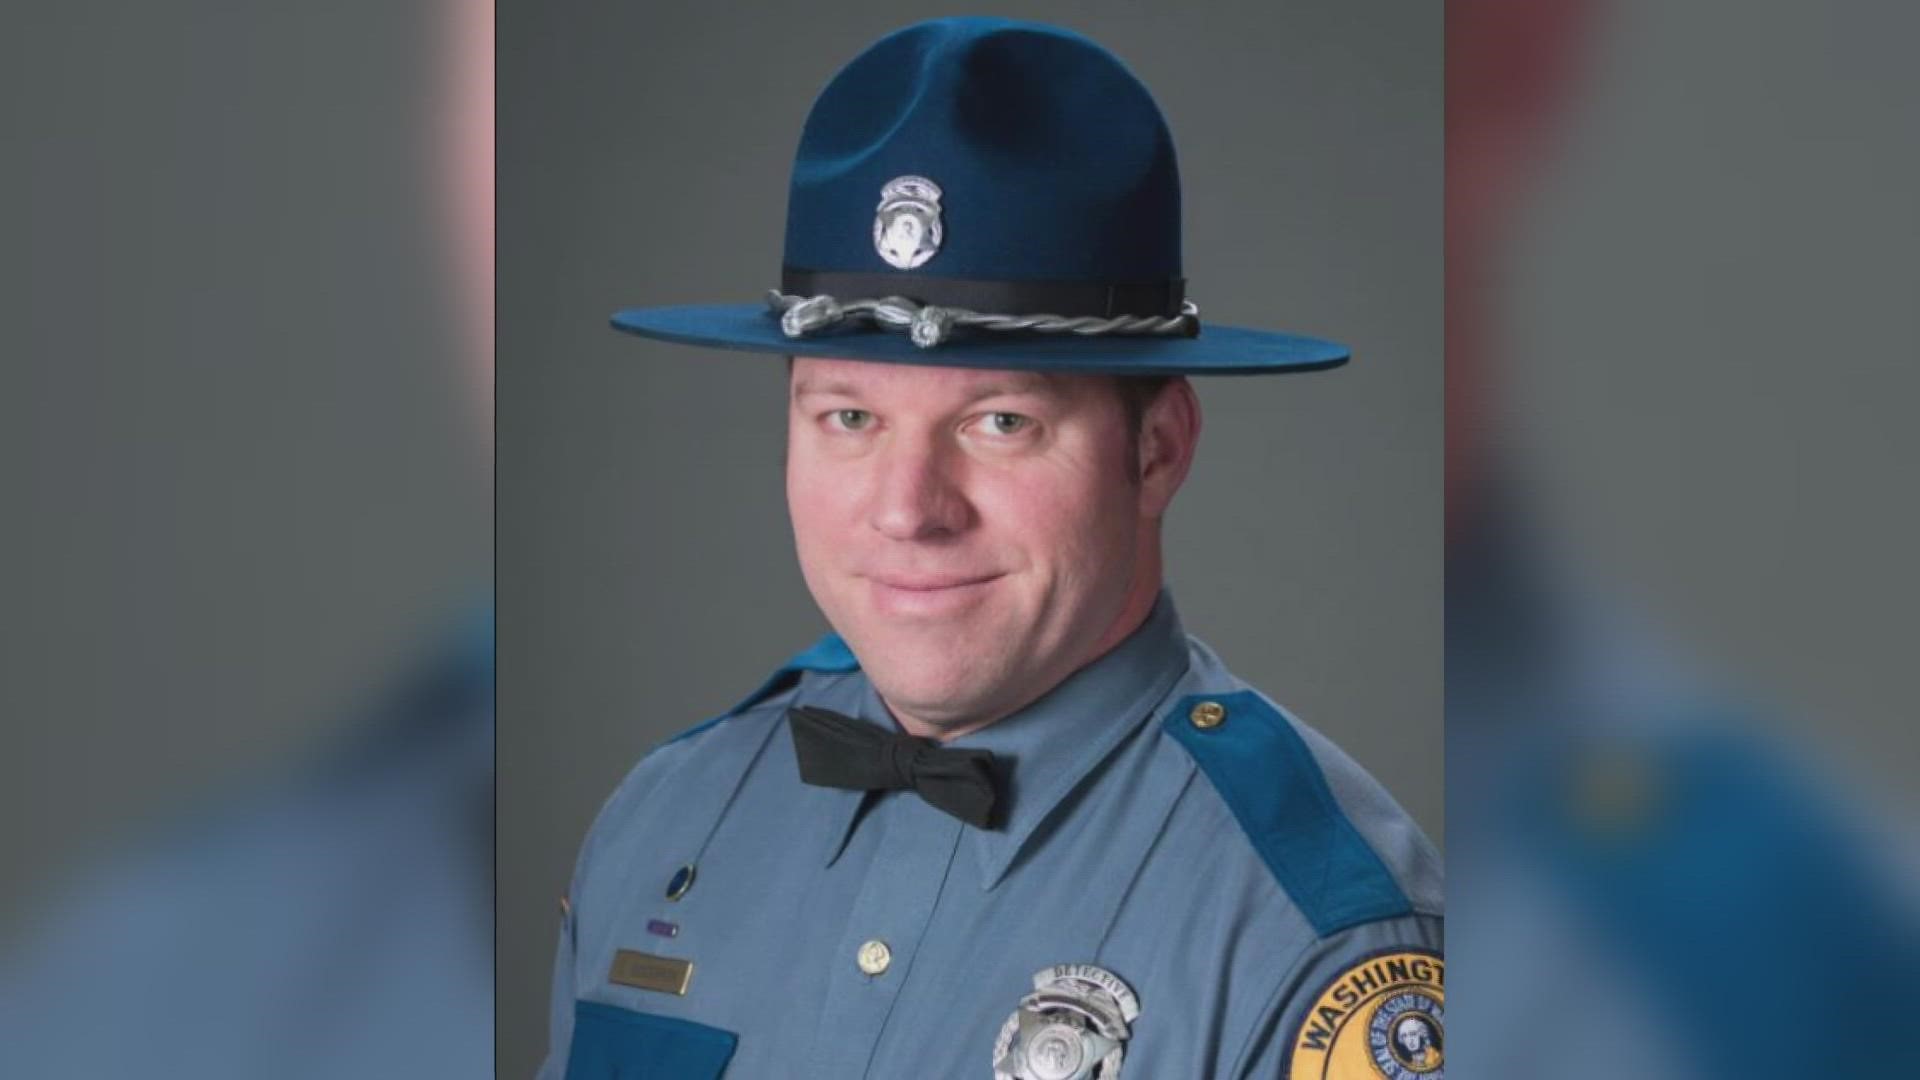 Washington State Patrol Trooper Detective Eric Gunderson passed away Sunday after a battle with COVID-19.